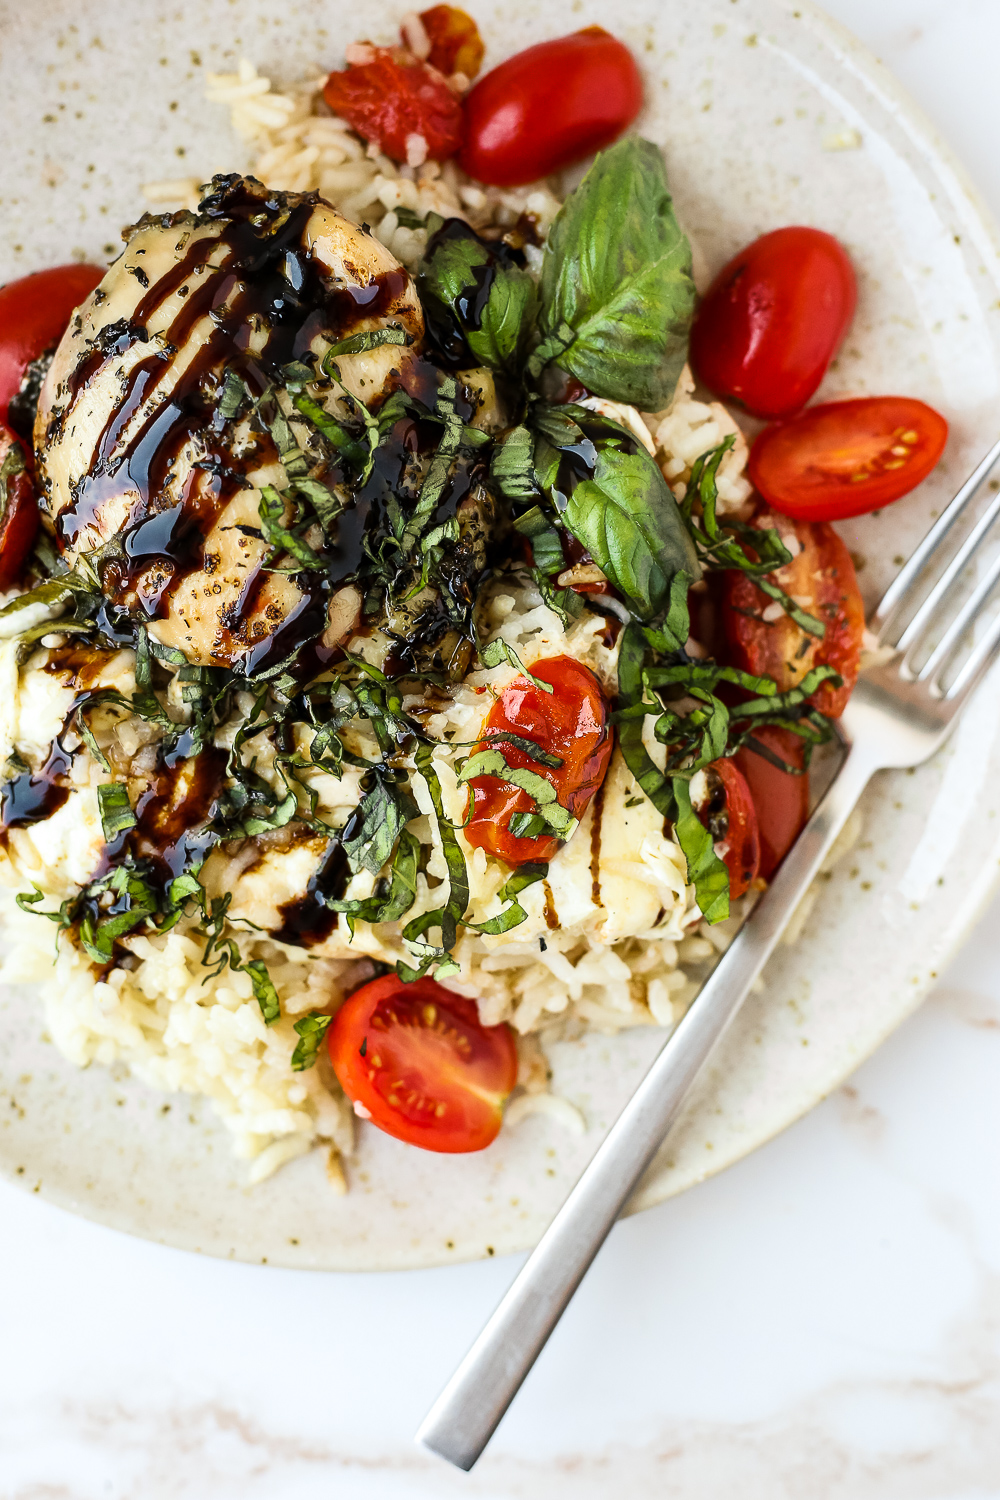 Overhead view of a baked caprese chicken dish served with rice and sliced tomatoes and basil